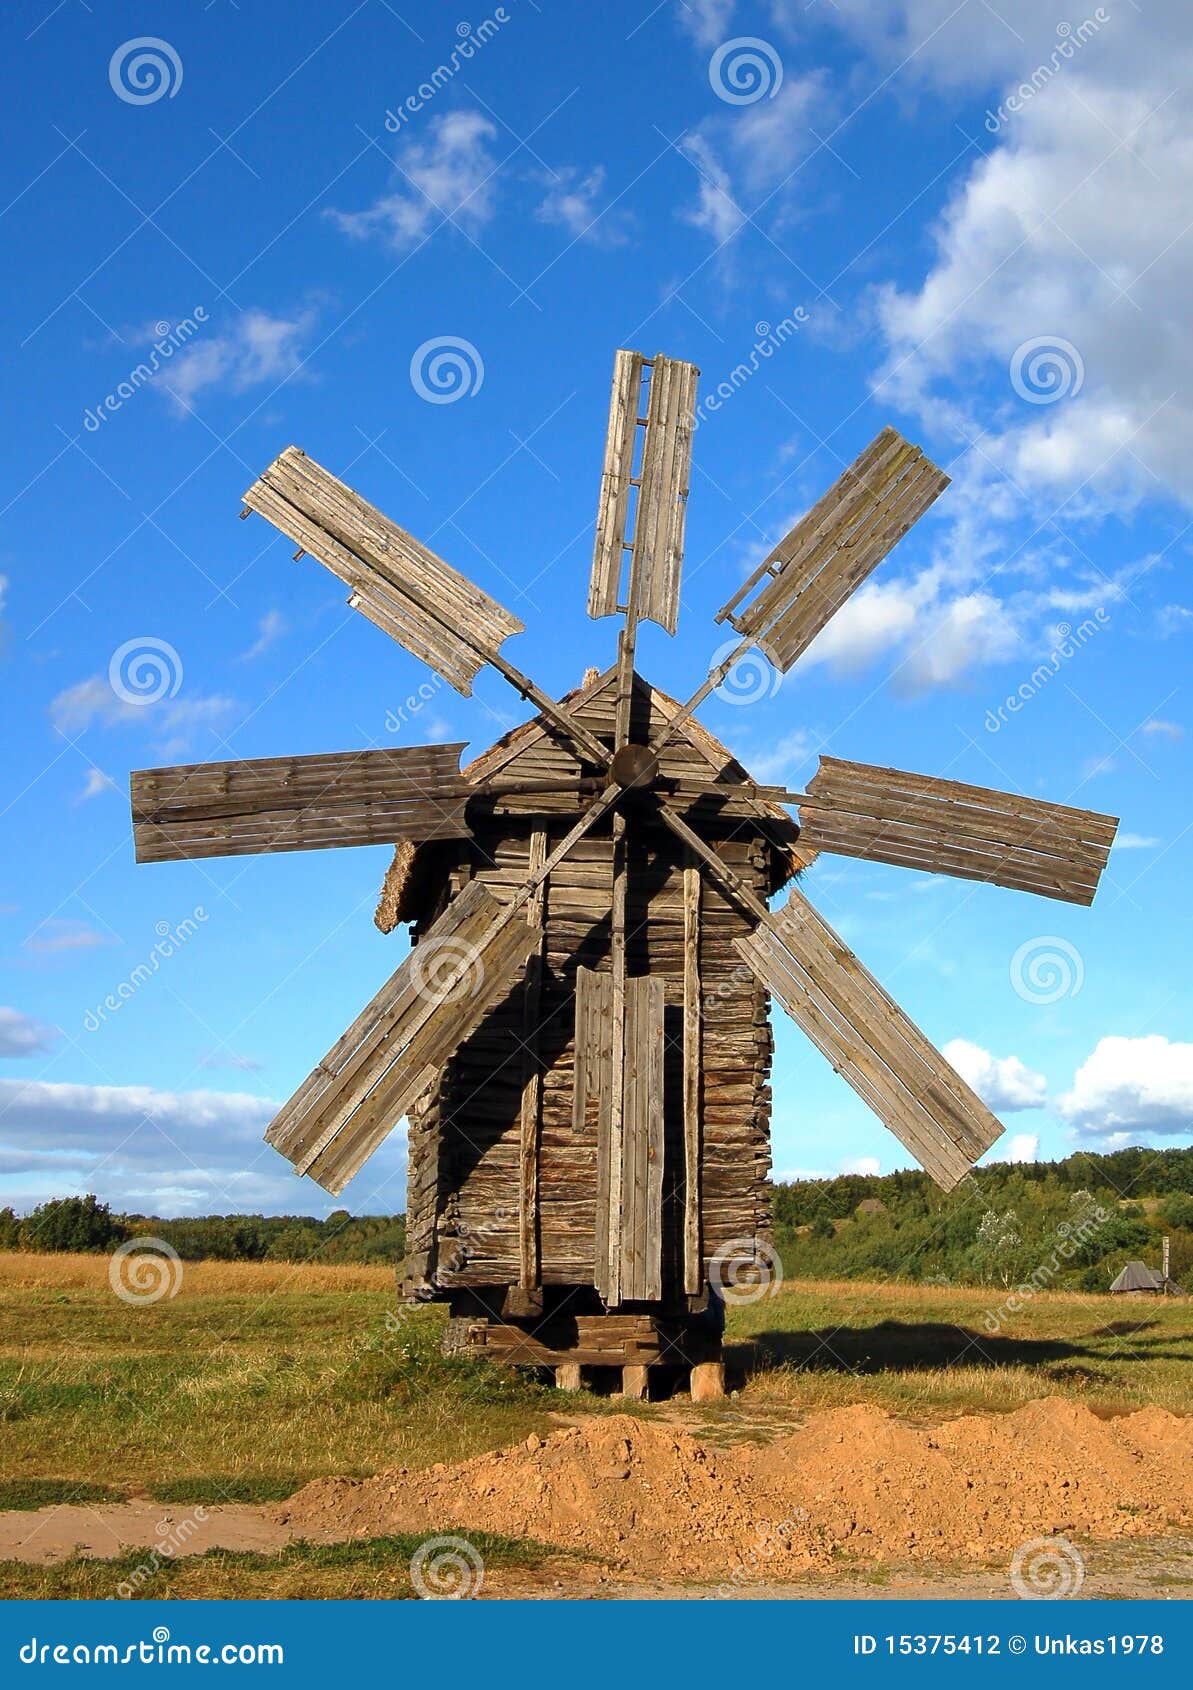 Wooden Windmill Plans Free http://www.dreamstime.com/stock-photography 